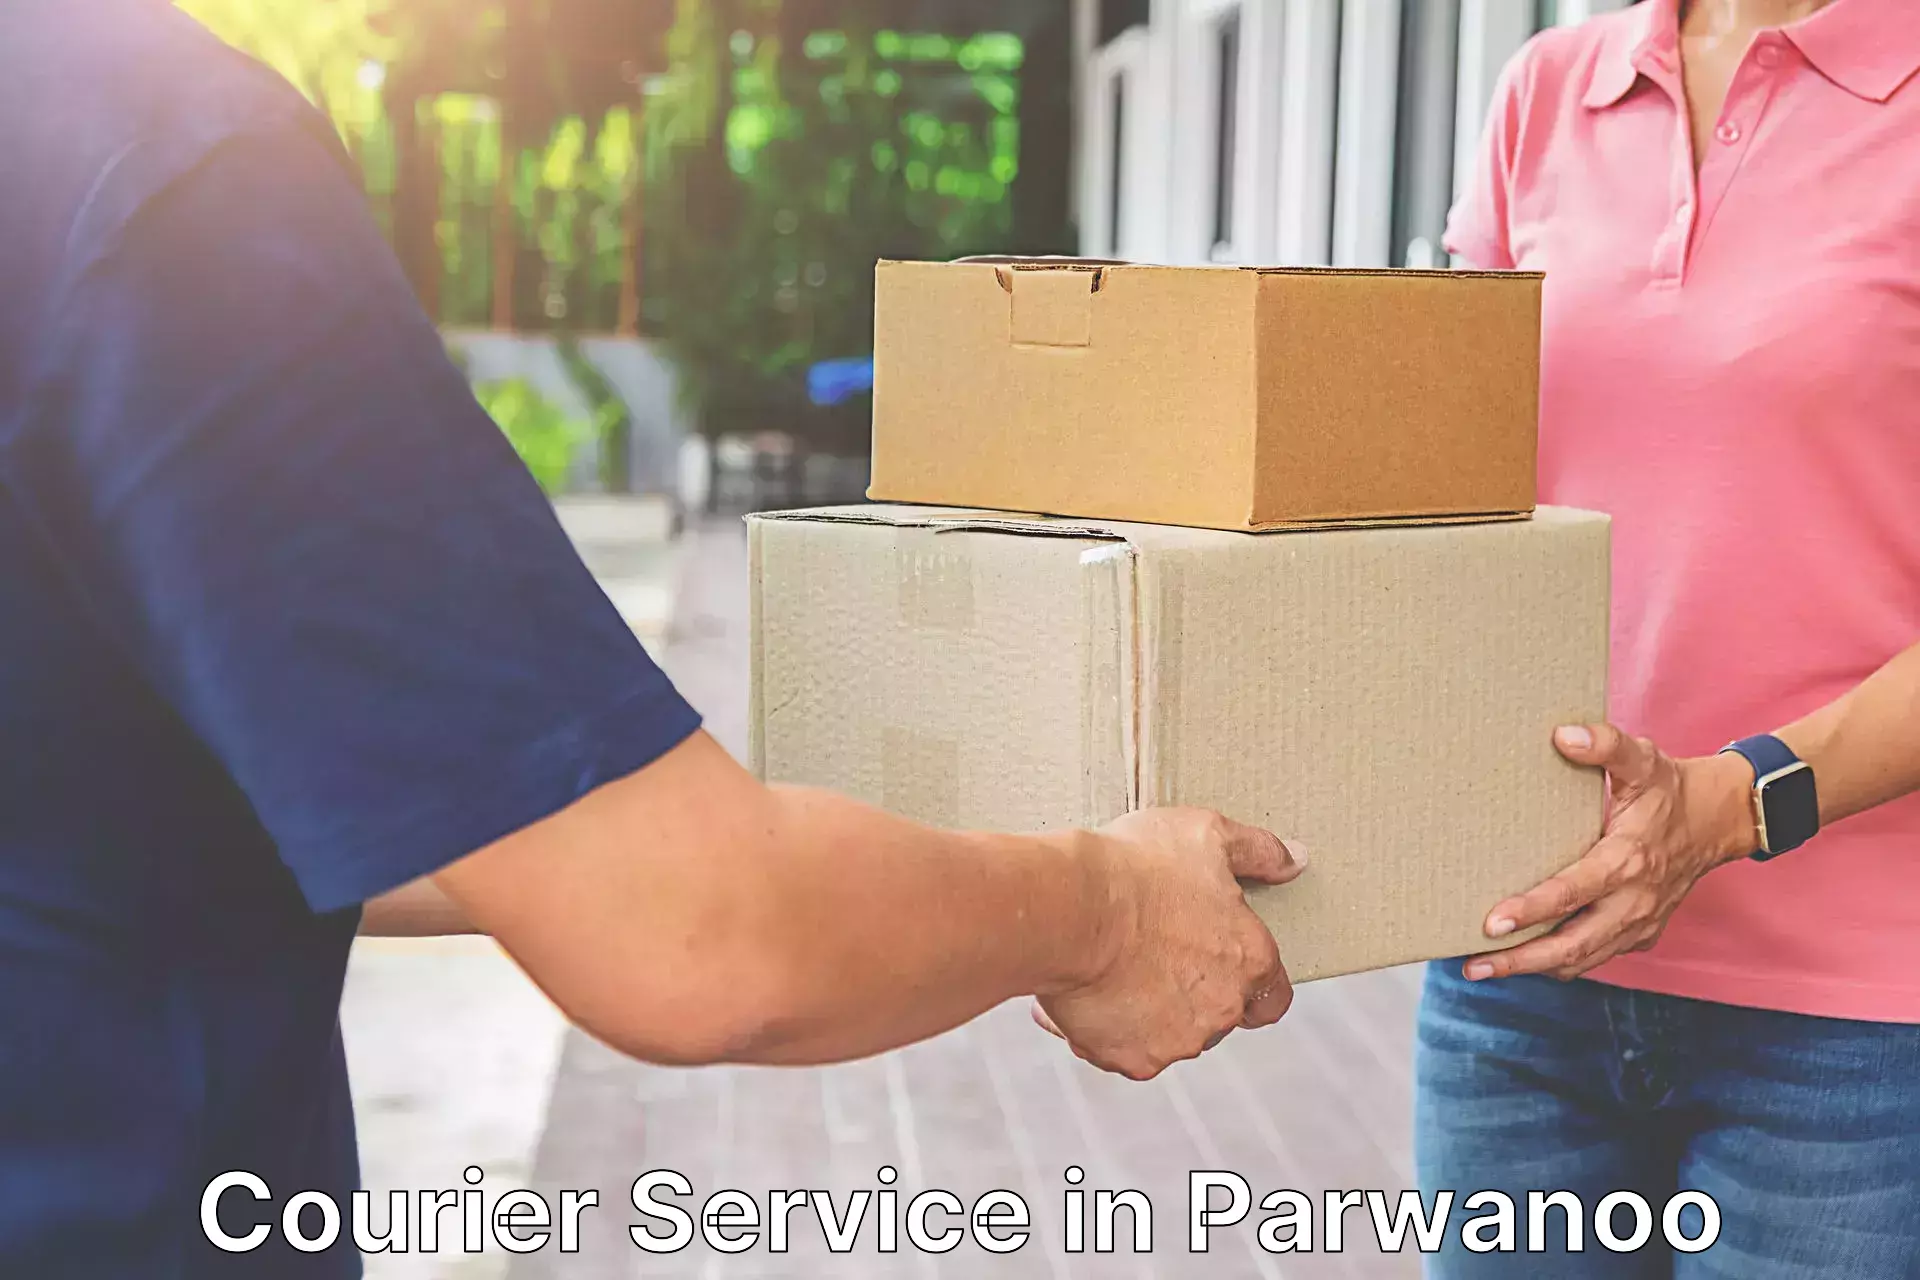 Logistics and distribution in Parwanoo